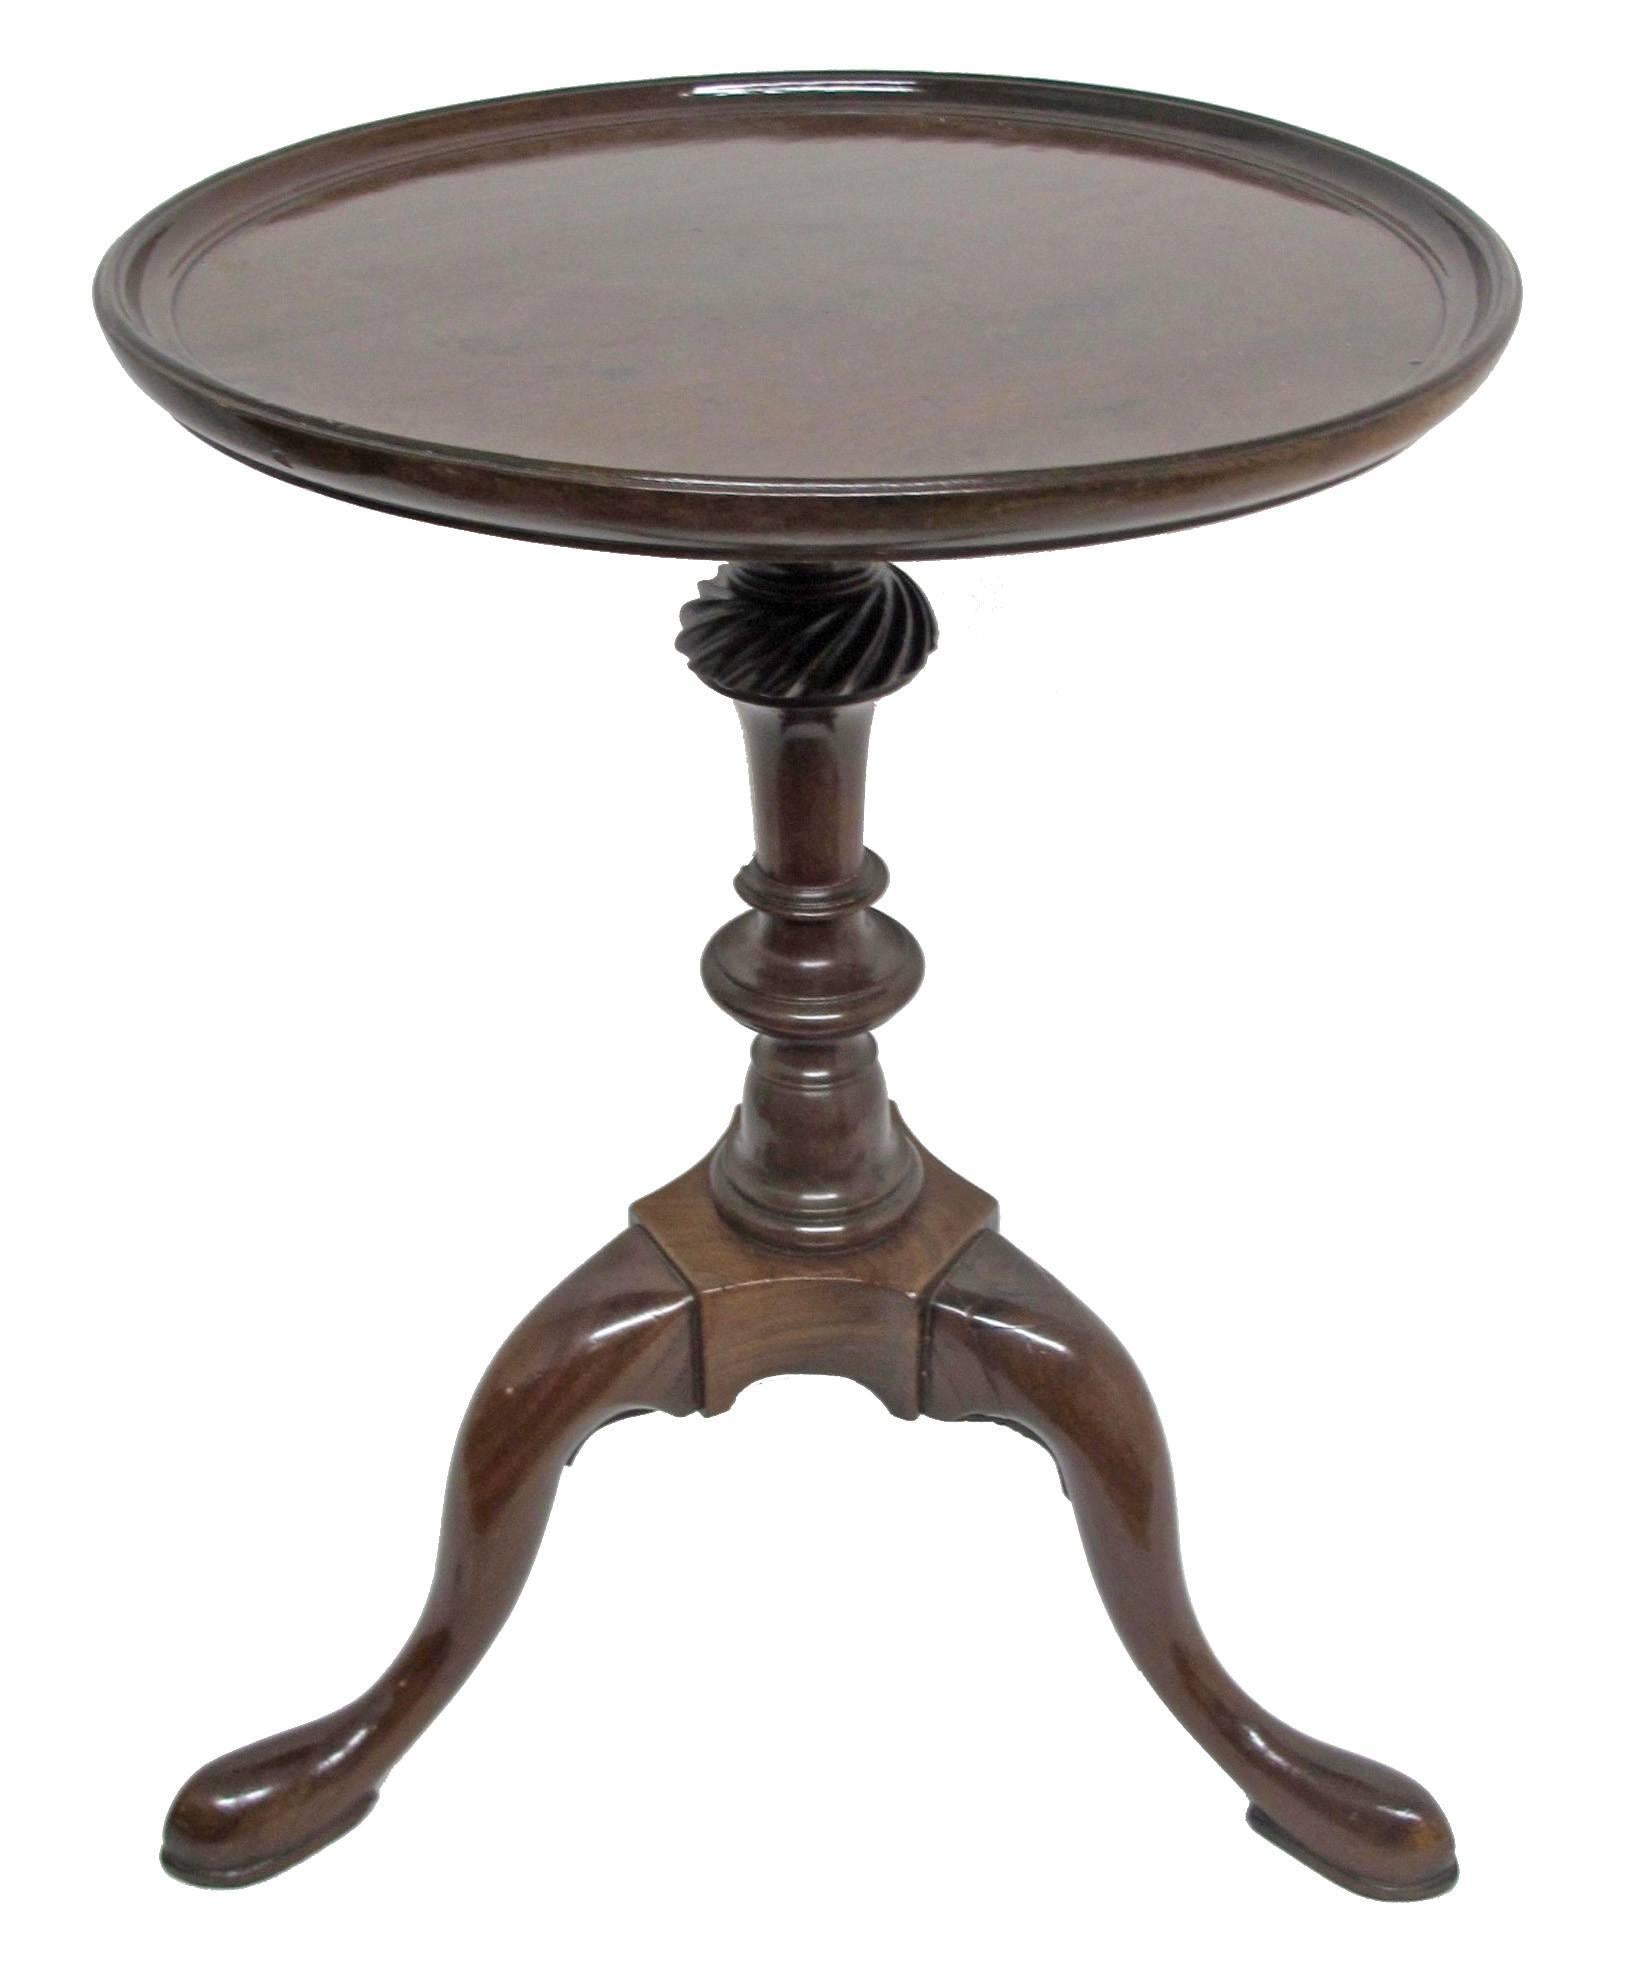 George II period mahogany wine tasting table. Table has one old professional repair to one leg, England, mid-late 18th century.